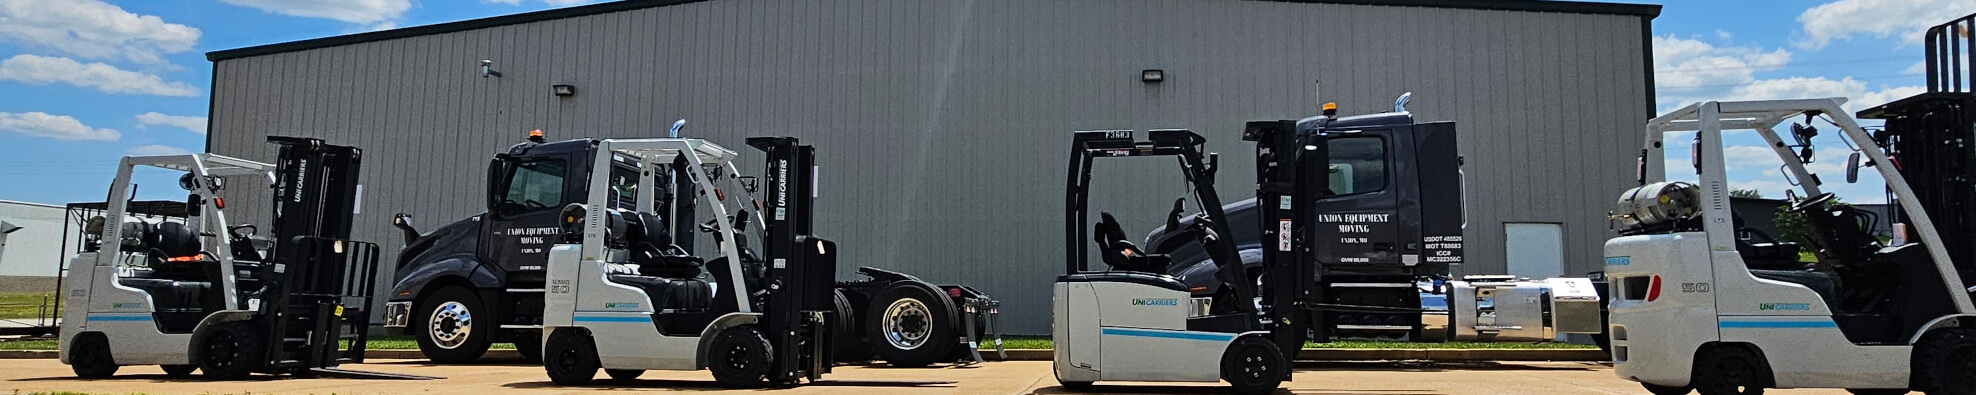 Unicarriers Forklifts